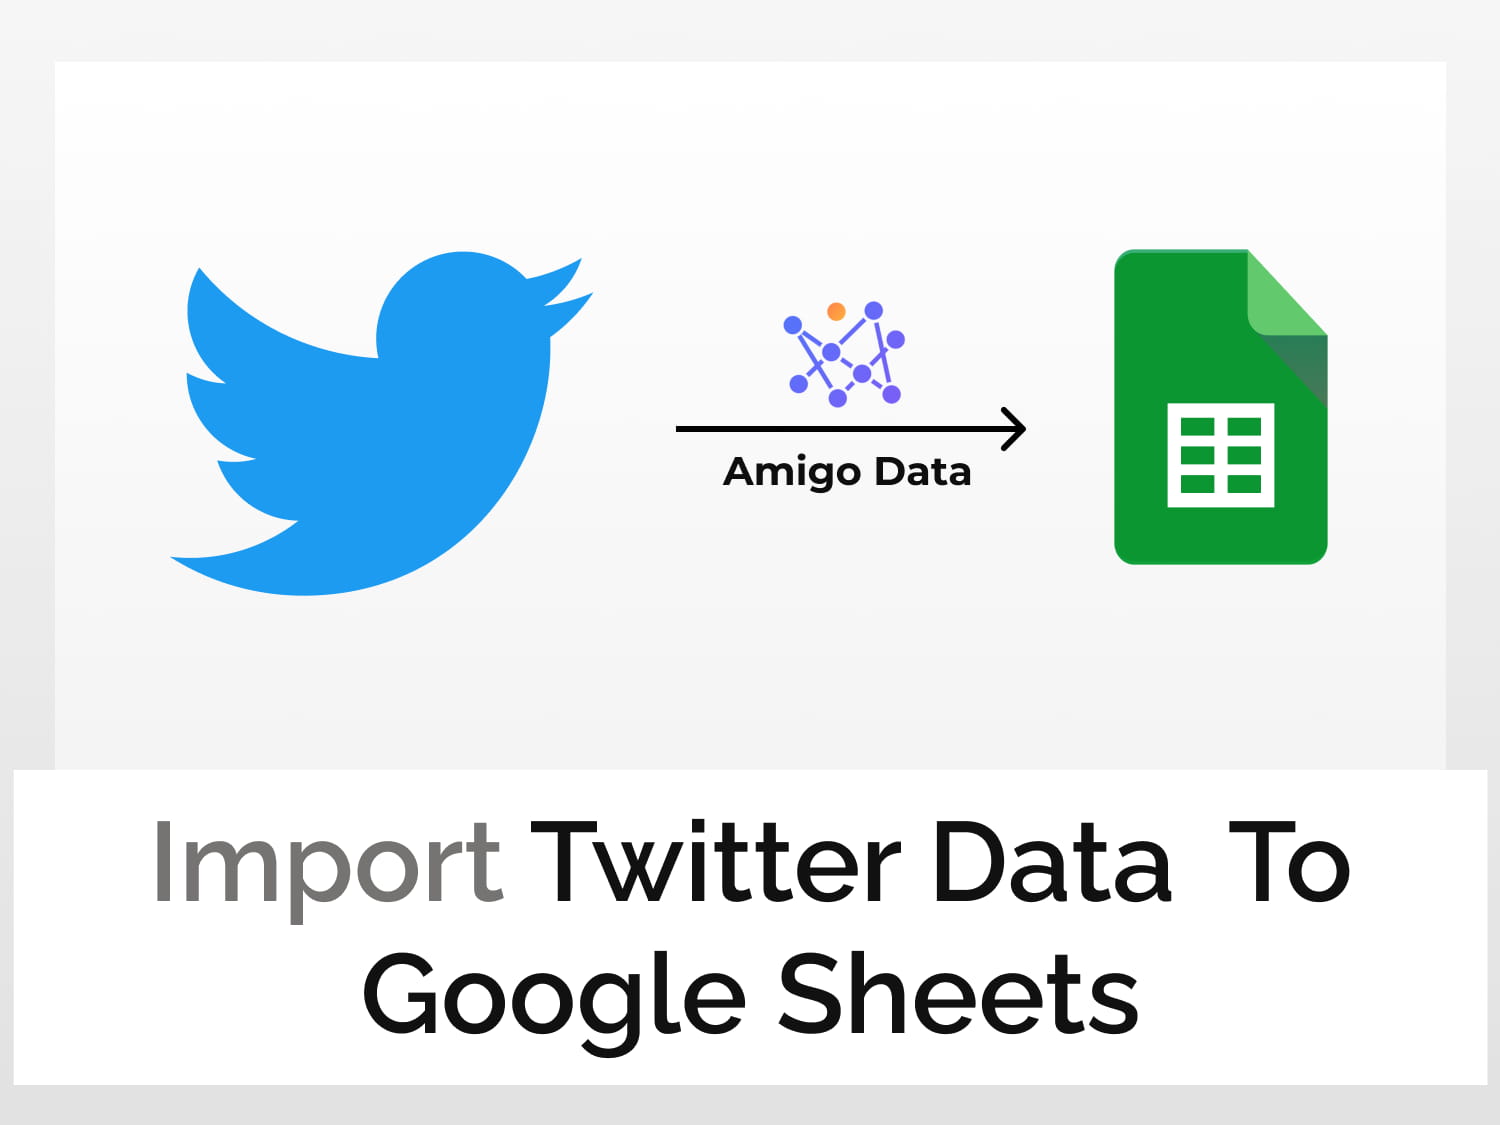 How to import Twitter data to Google Sheets